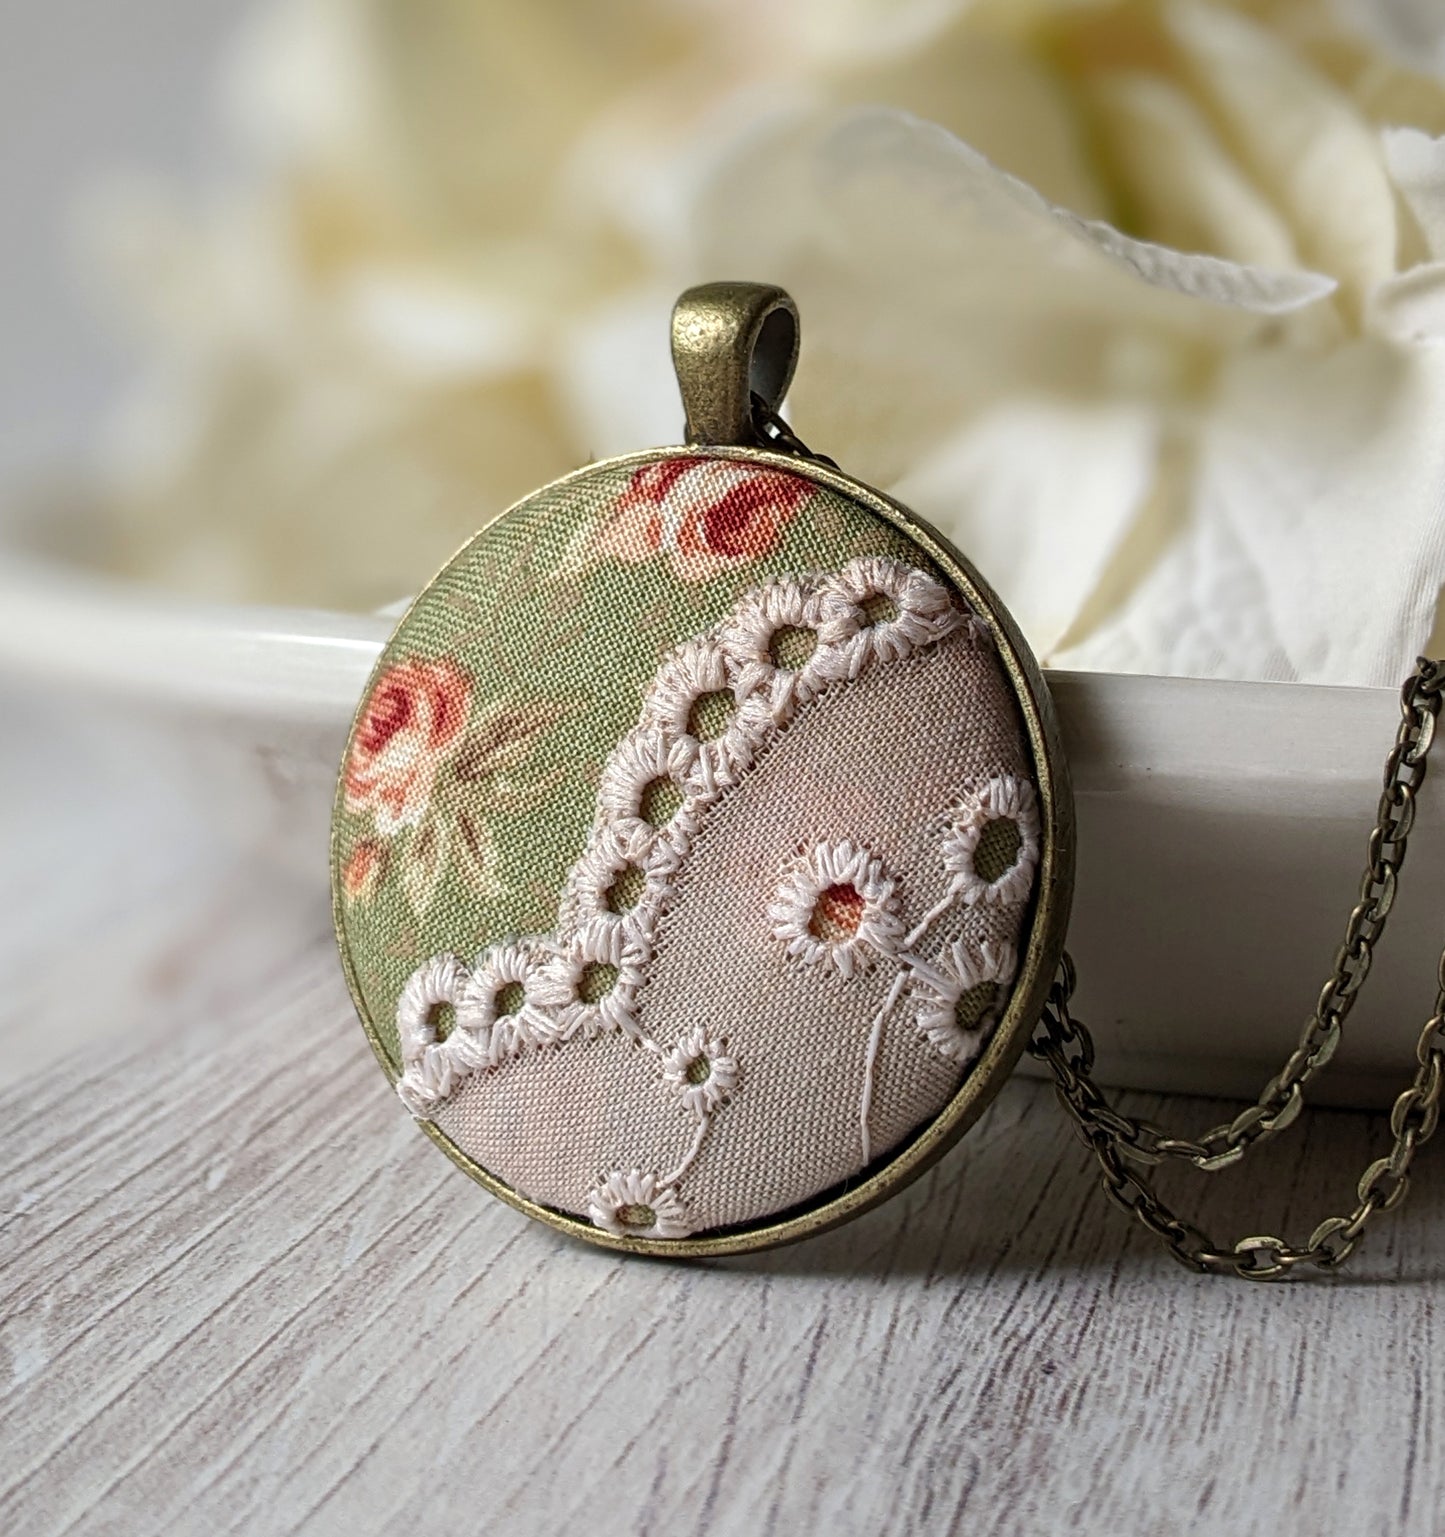 Rose Garden Necklace - Pink And Green Vintage Fabric, Beige Vintage Lace Pendant